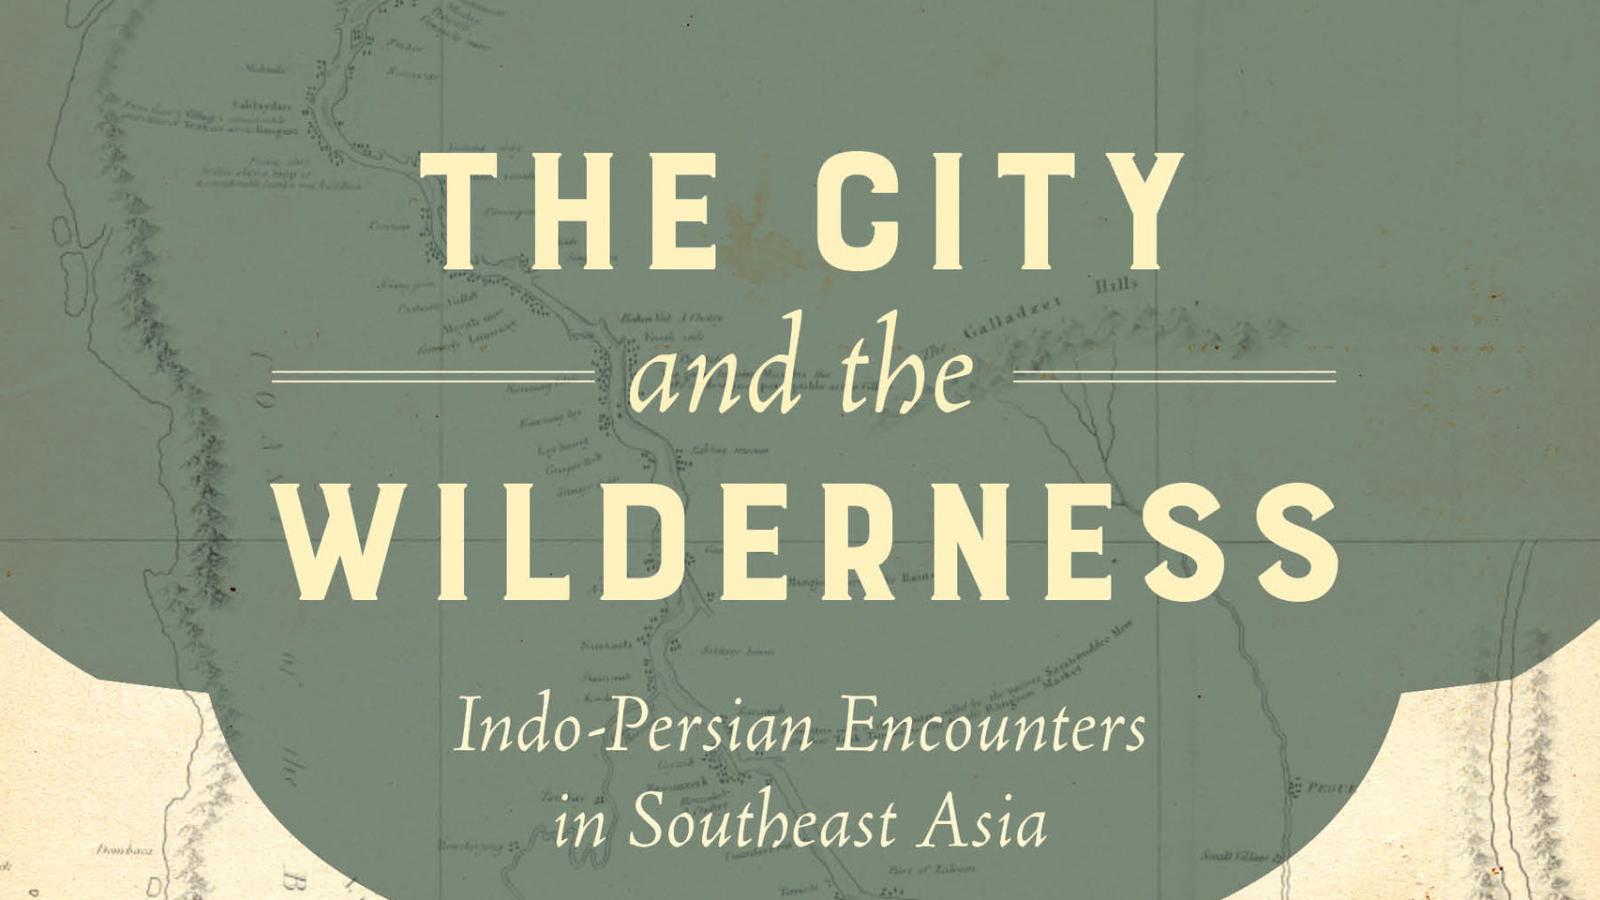 Khazeni's new book The City and the Wilderness